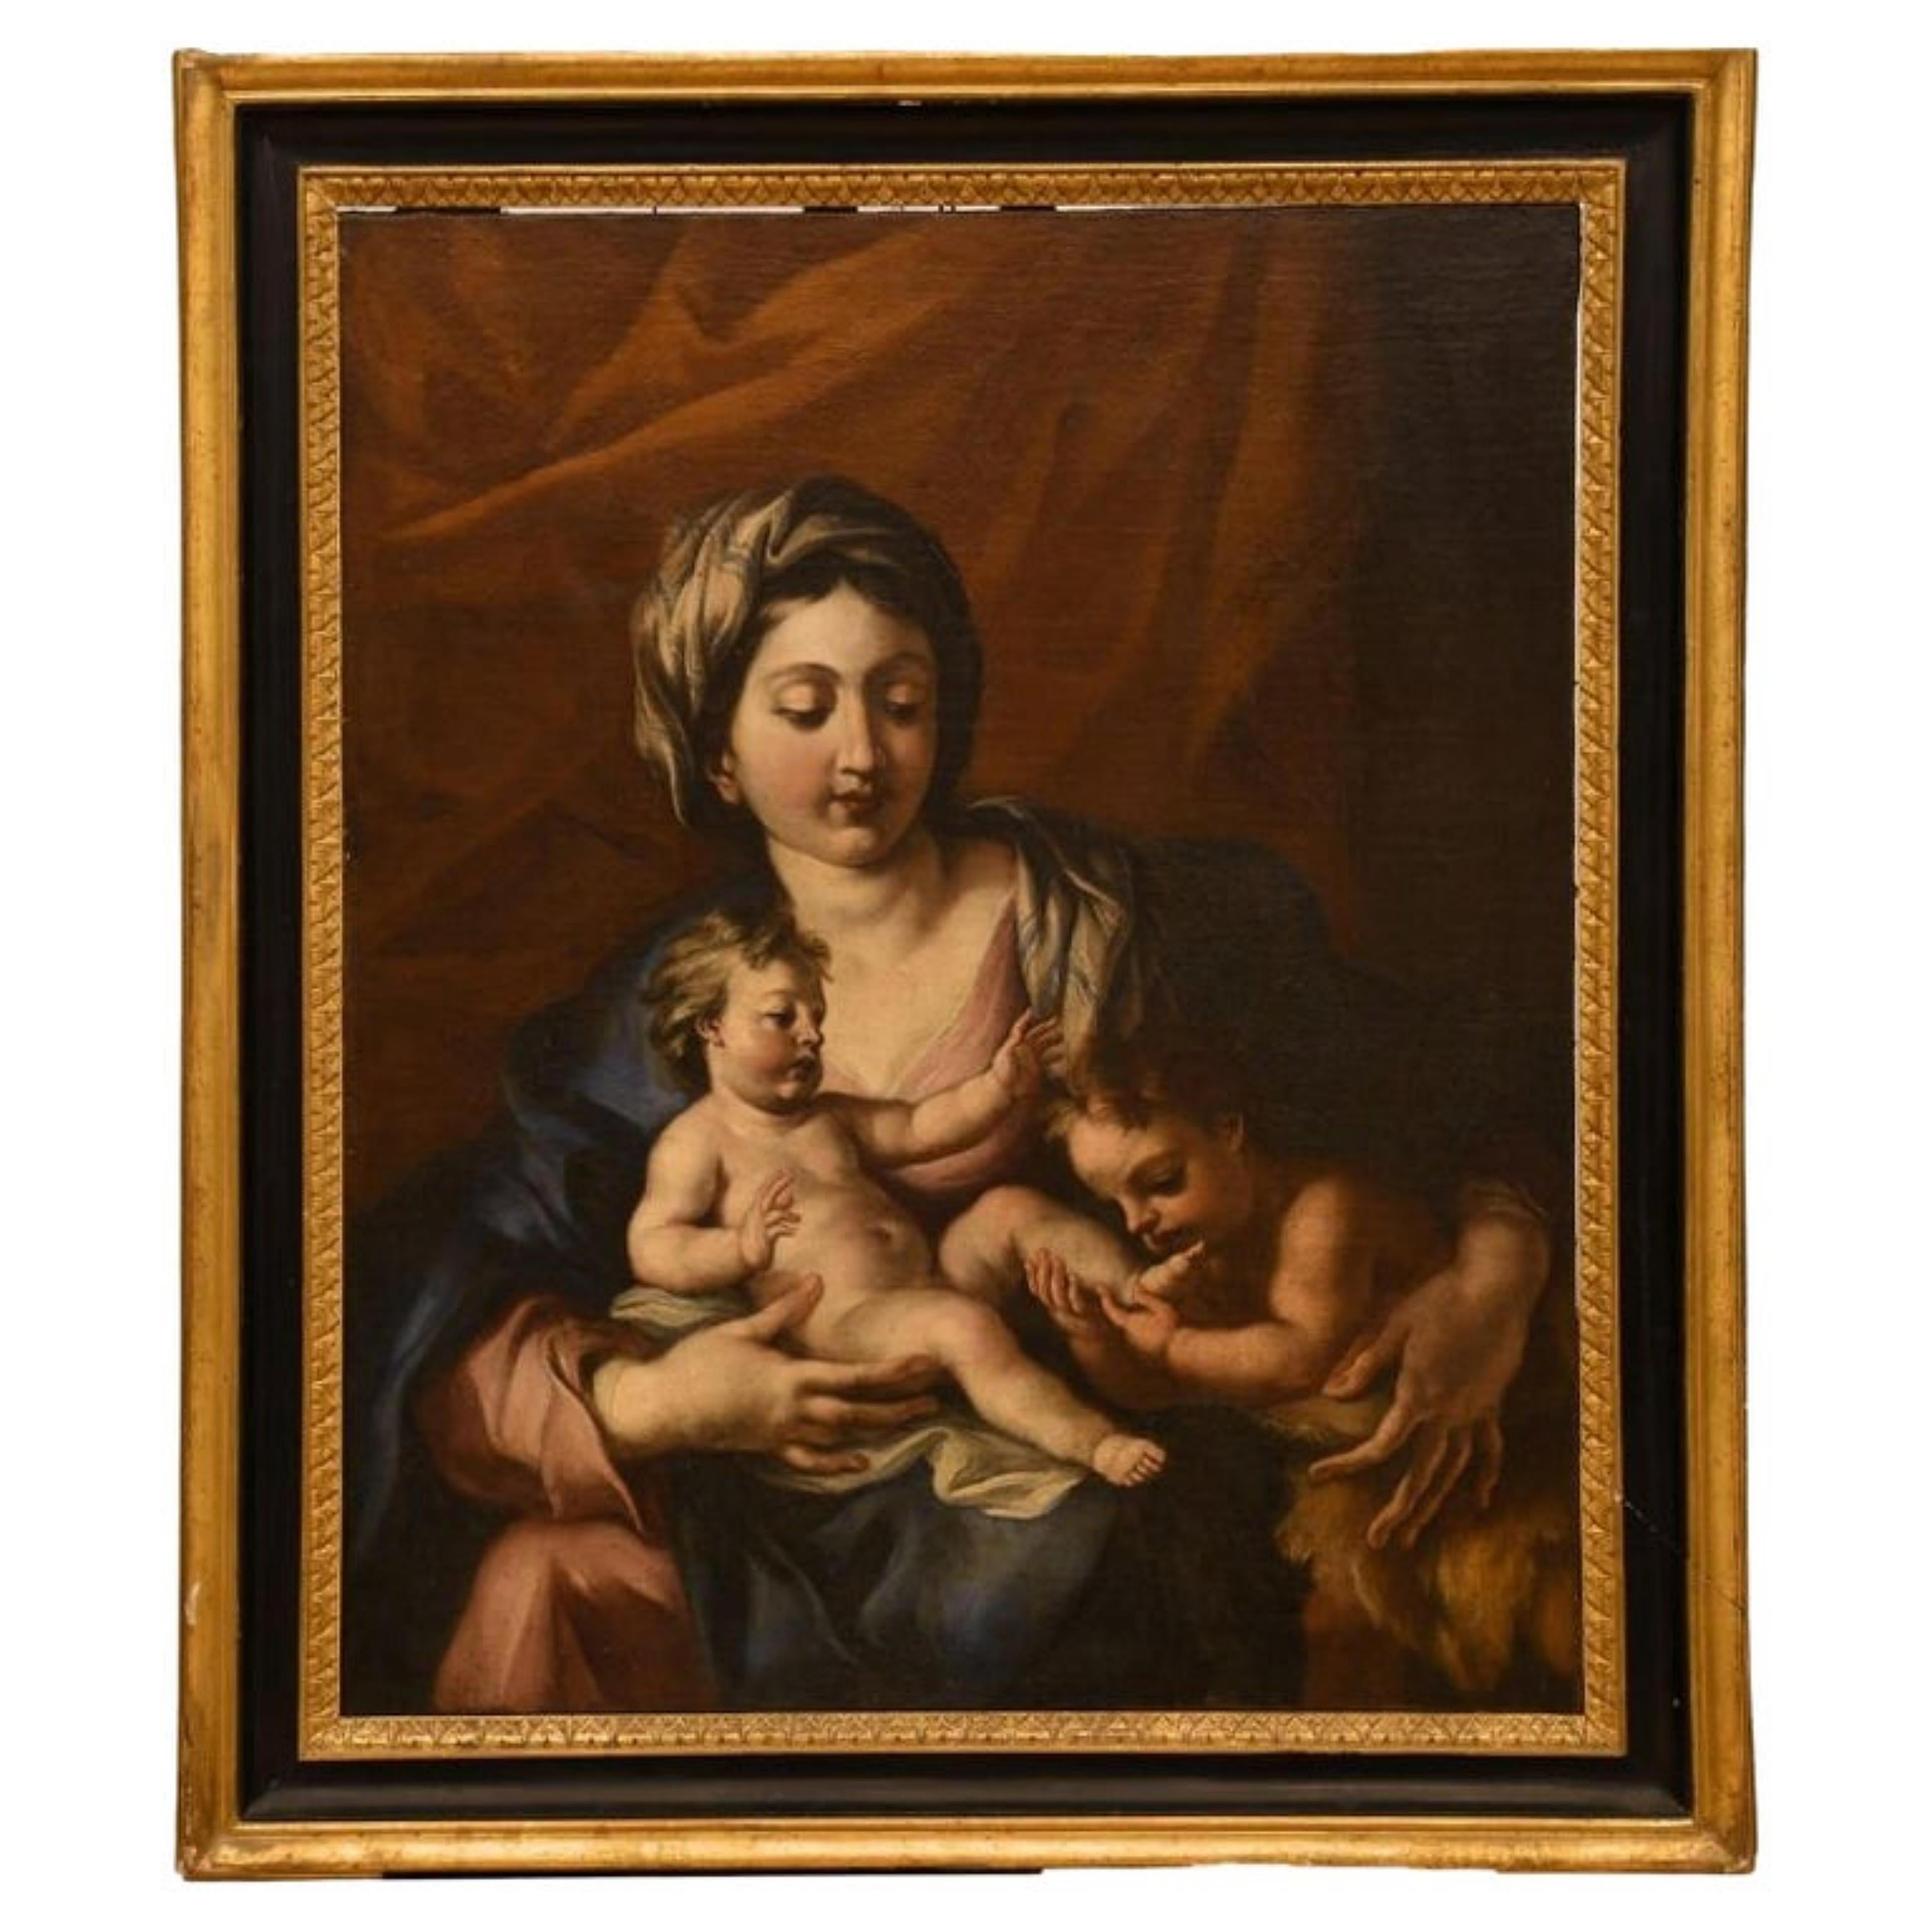 18th century Central Italian Painter - Madonna with the praying Saint John
oil painting on canvas
Dimensions:
63x76 cm
good condition